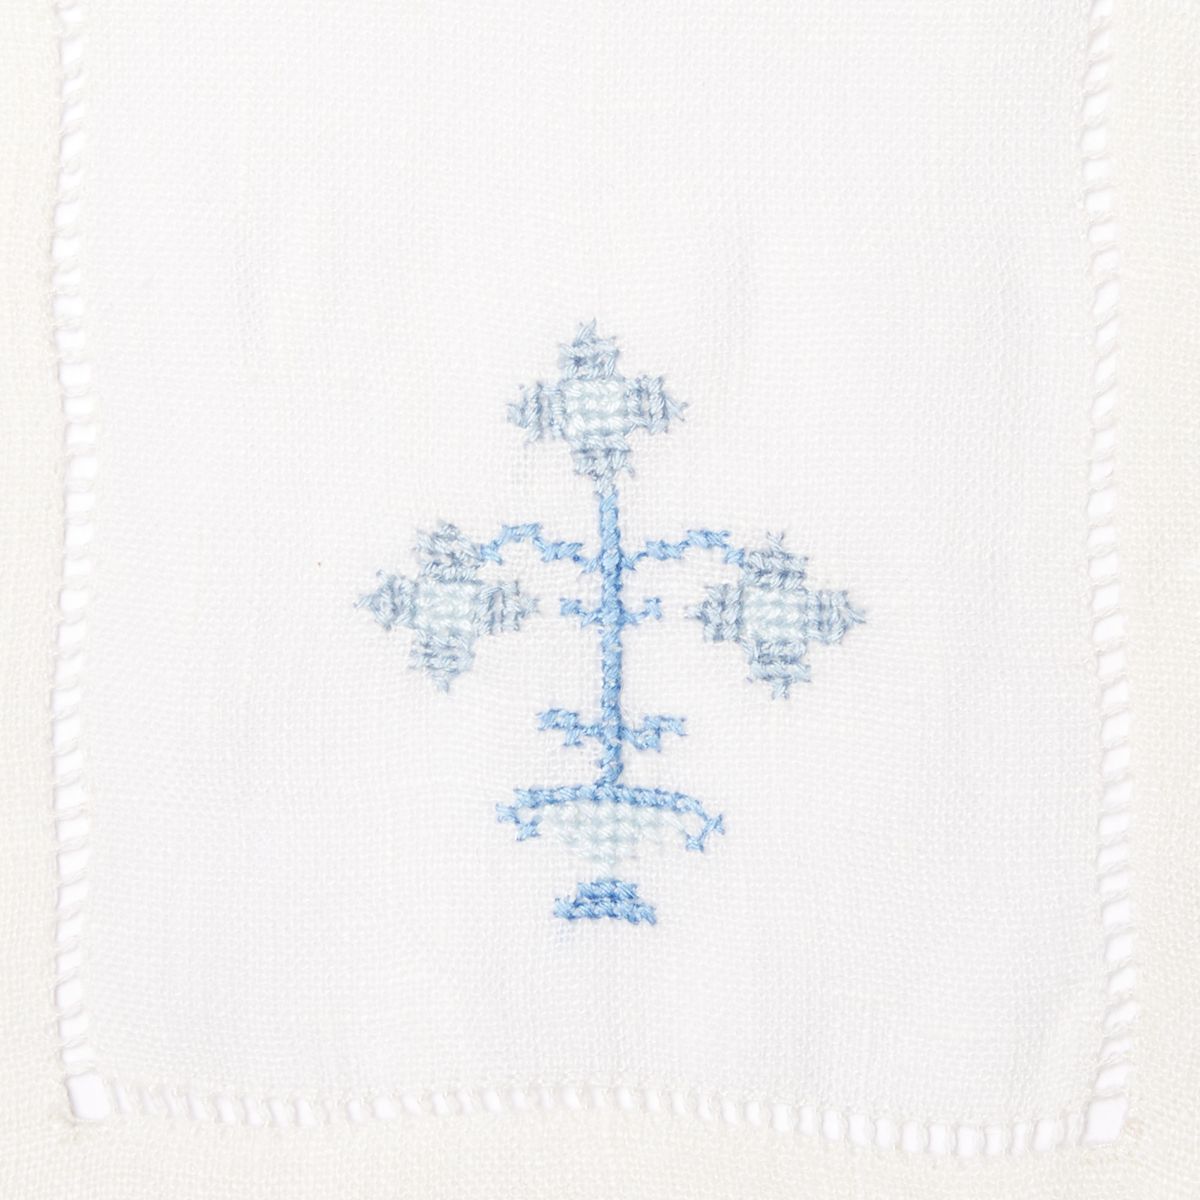 Stack of cloth napkins with blue embroidered flowers